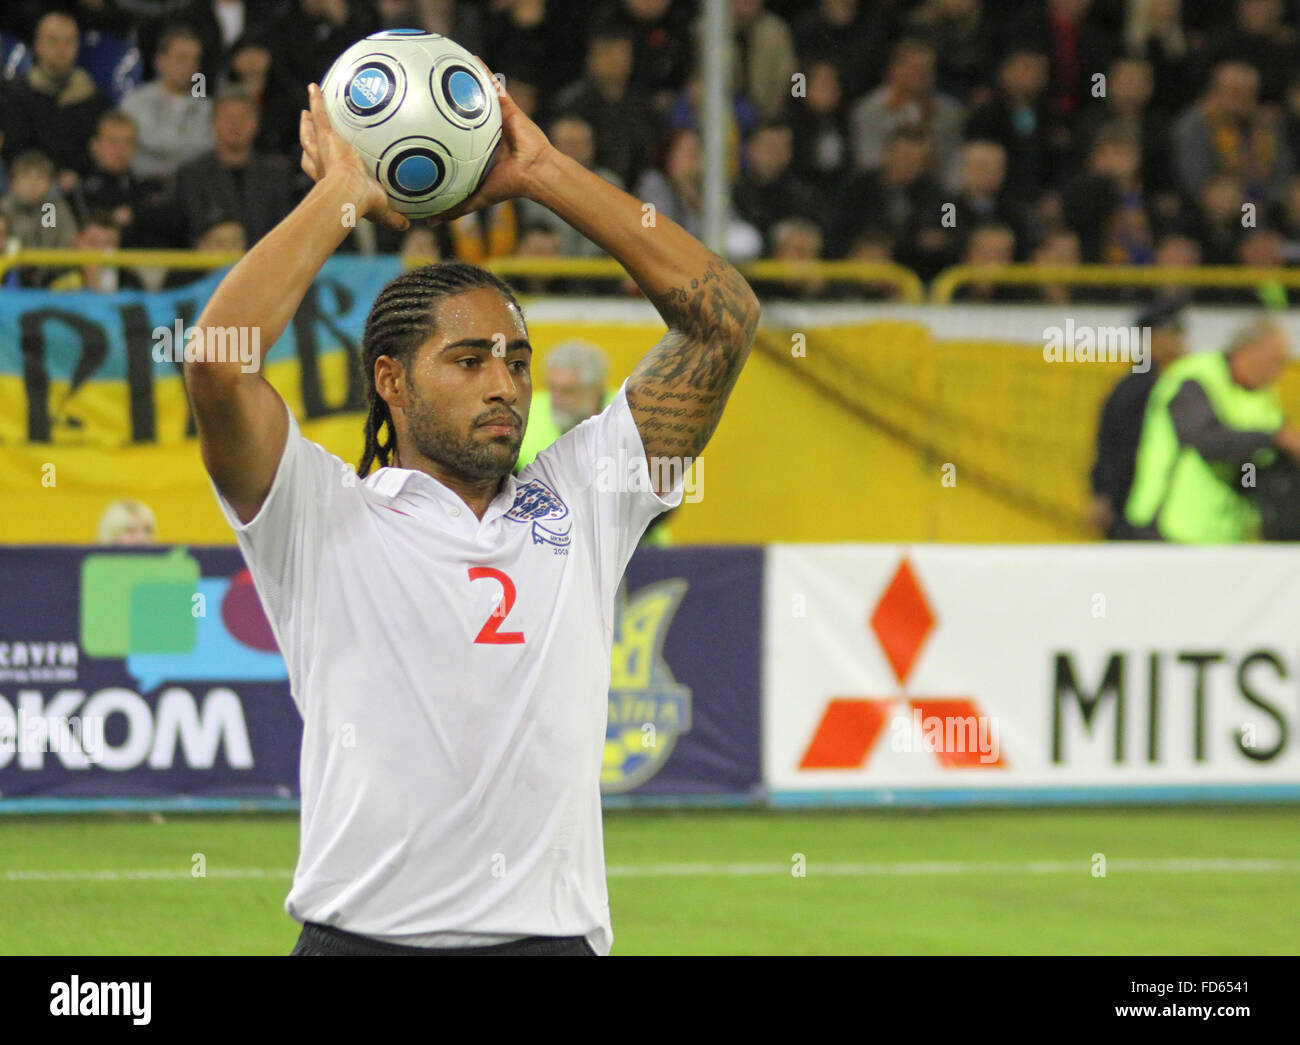 DNIPROPETROVSK, UKRAINE - OCTOBER 10: Glen Johnson (England) throws the ball during the WC2010 Group 6 qualifying football match between Ukraine and England on October 10, 2009 in Dnepropetrovsk Stock Photo